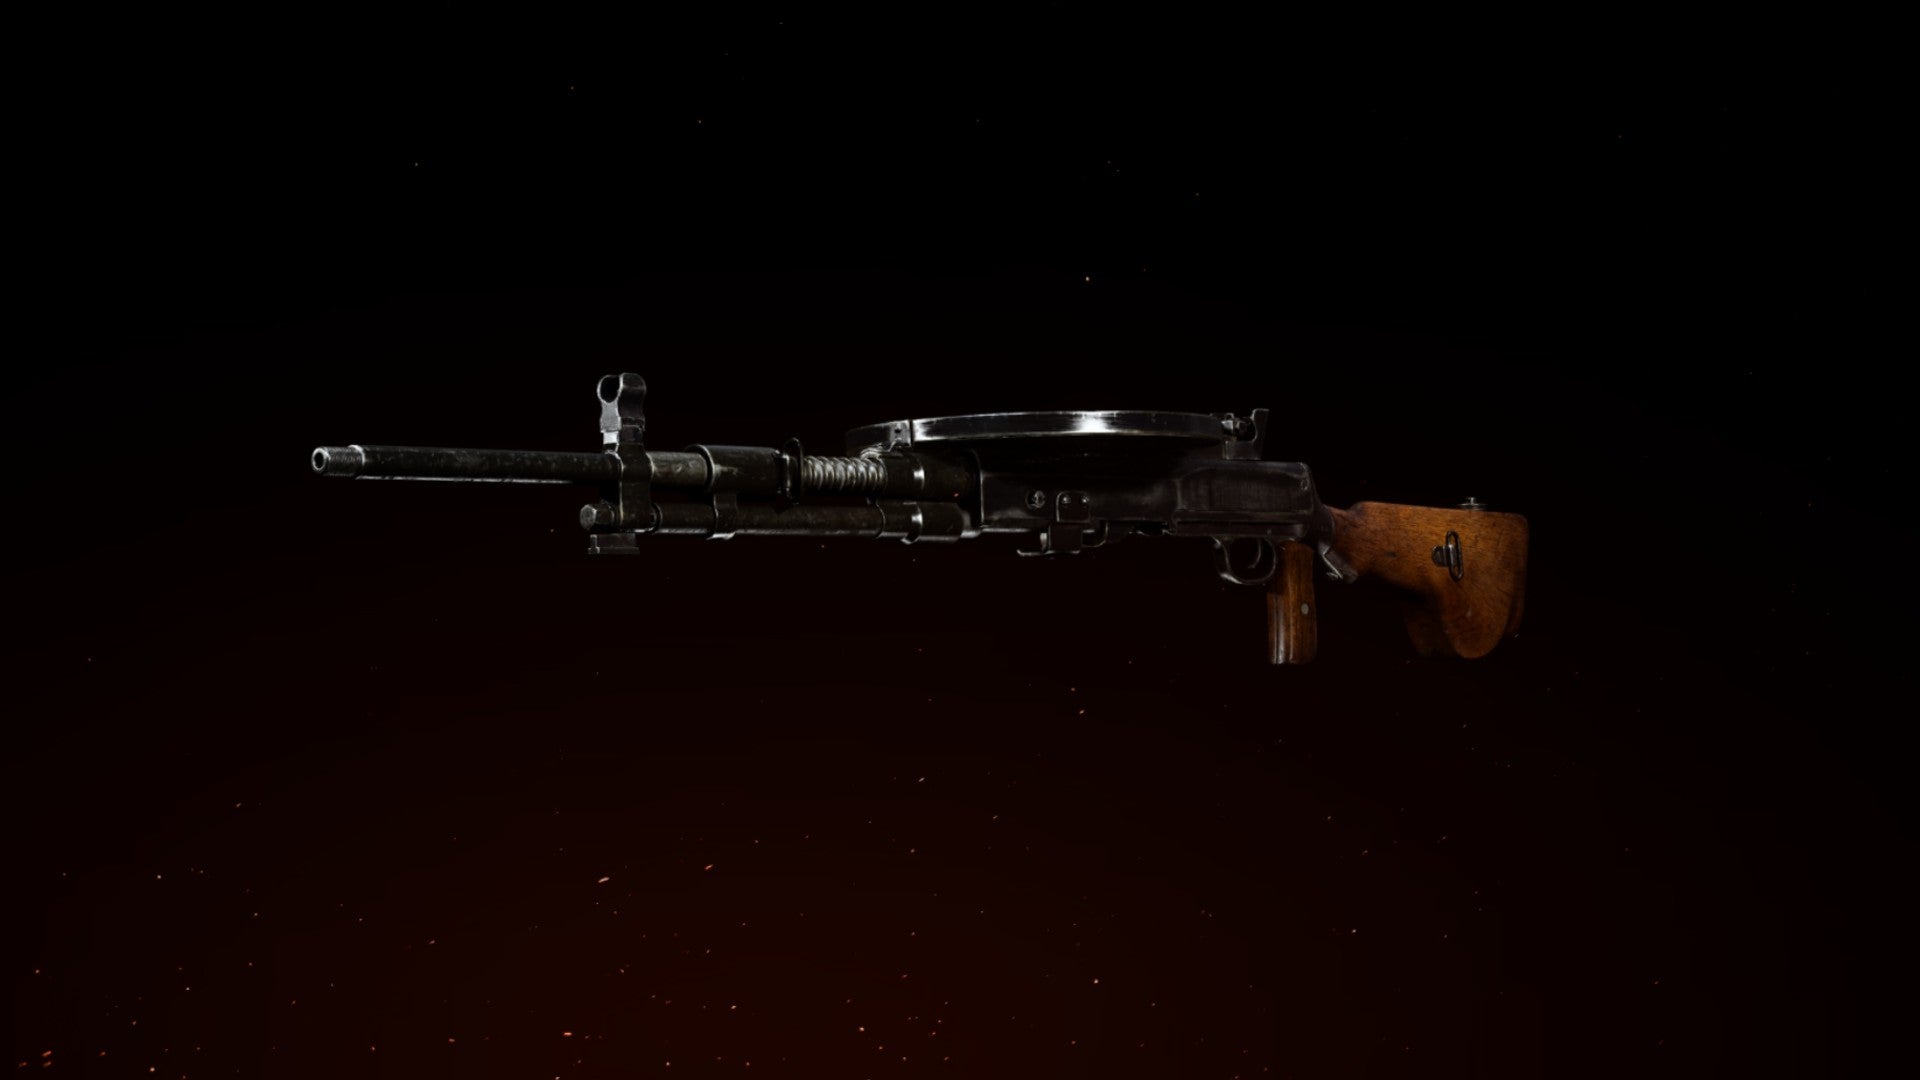 DP27 LMG in the gunsmith preview screen in Call Of Duty: Vanguard. Dark background with fiery red hue in lower left corner.